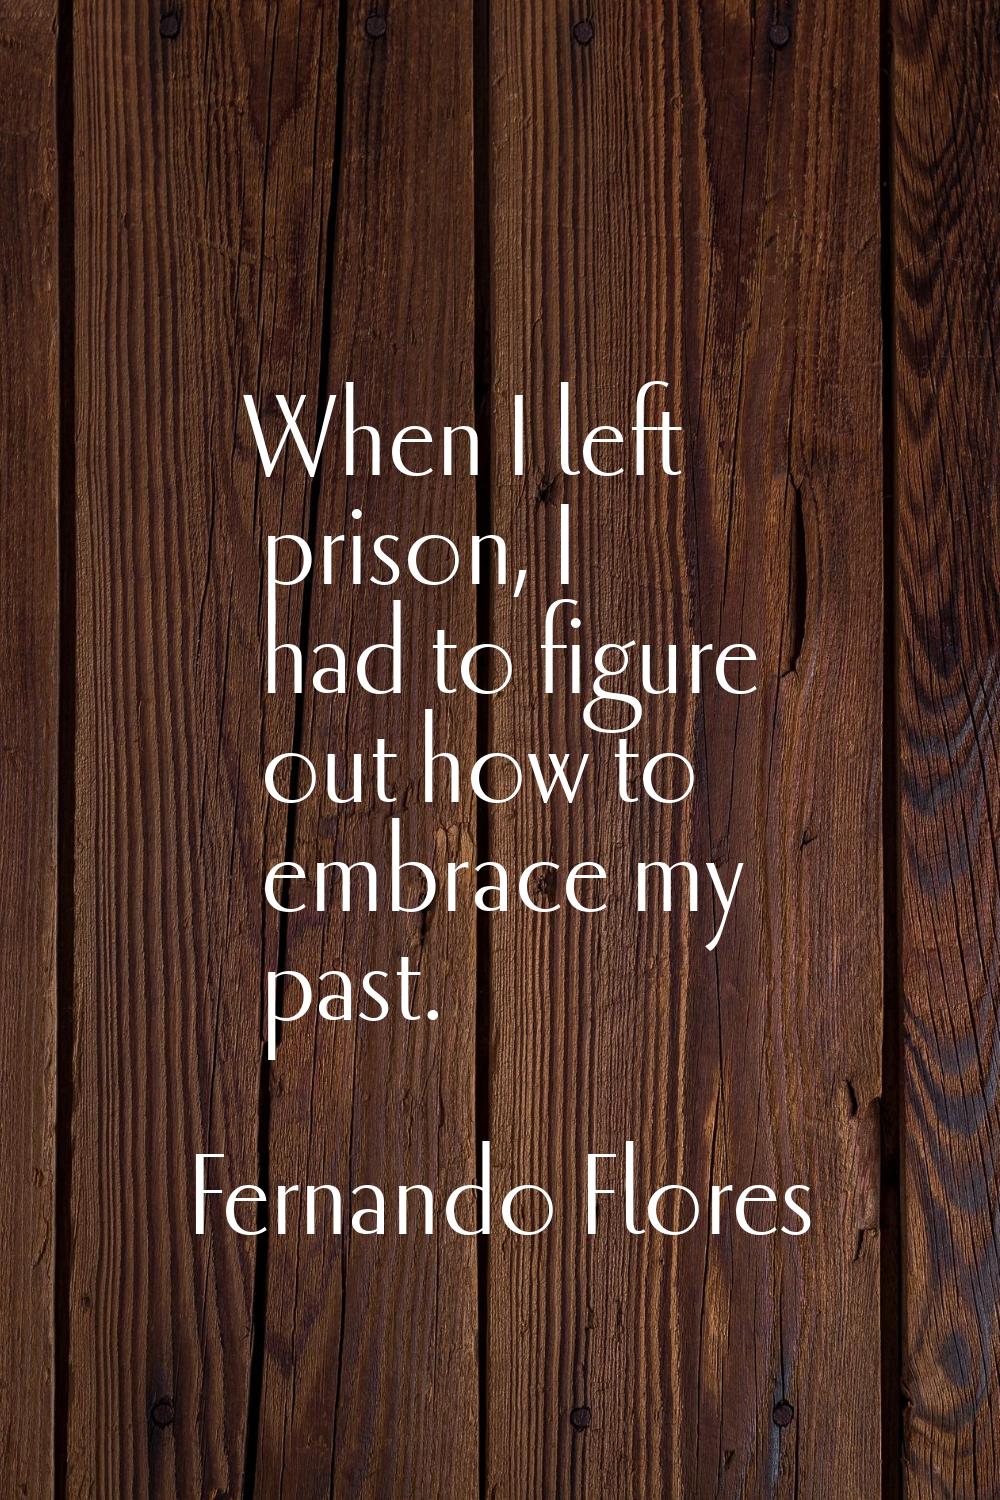 When I left prison, I had to figure out how to embrace my past.